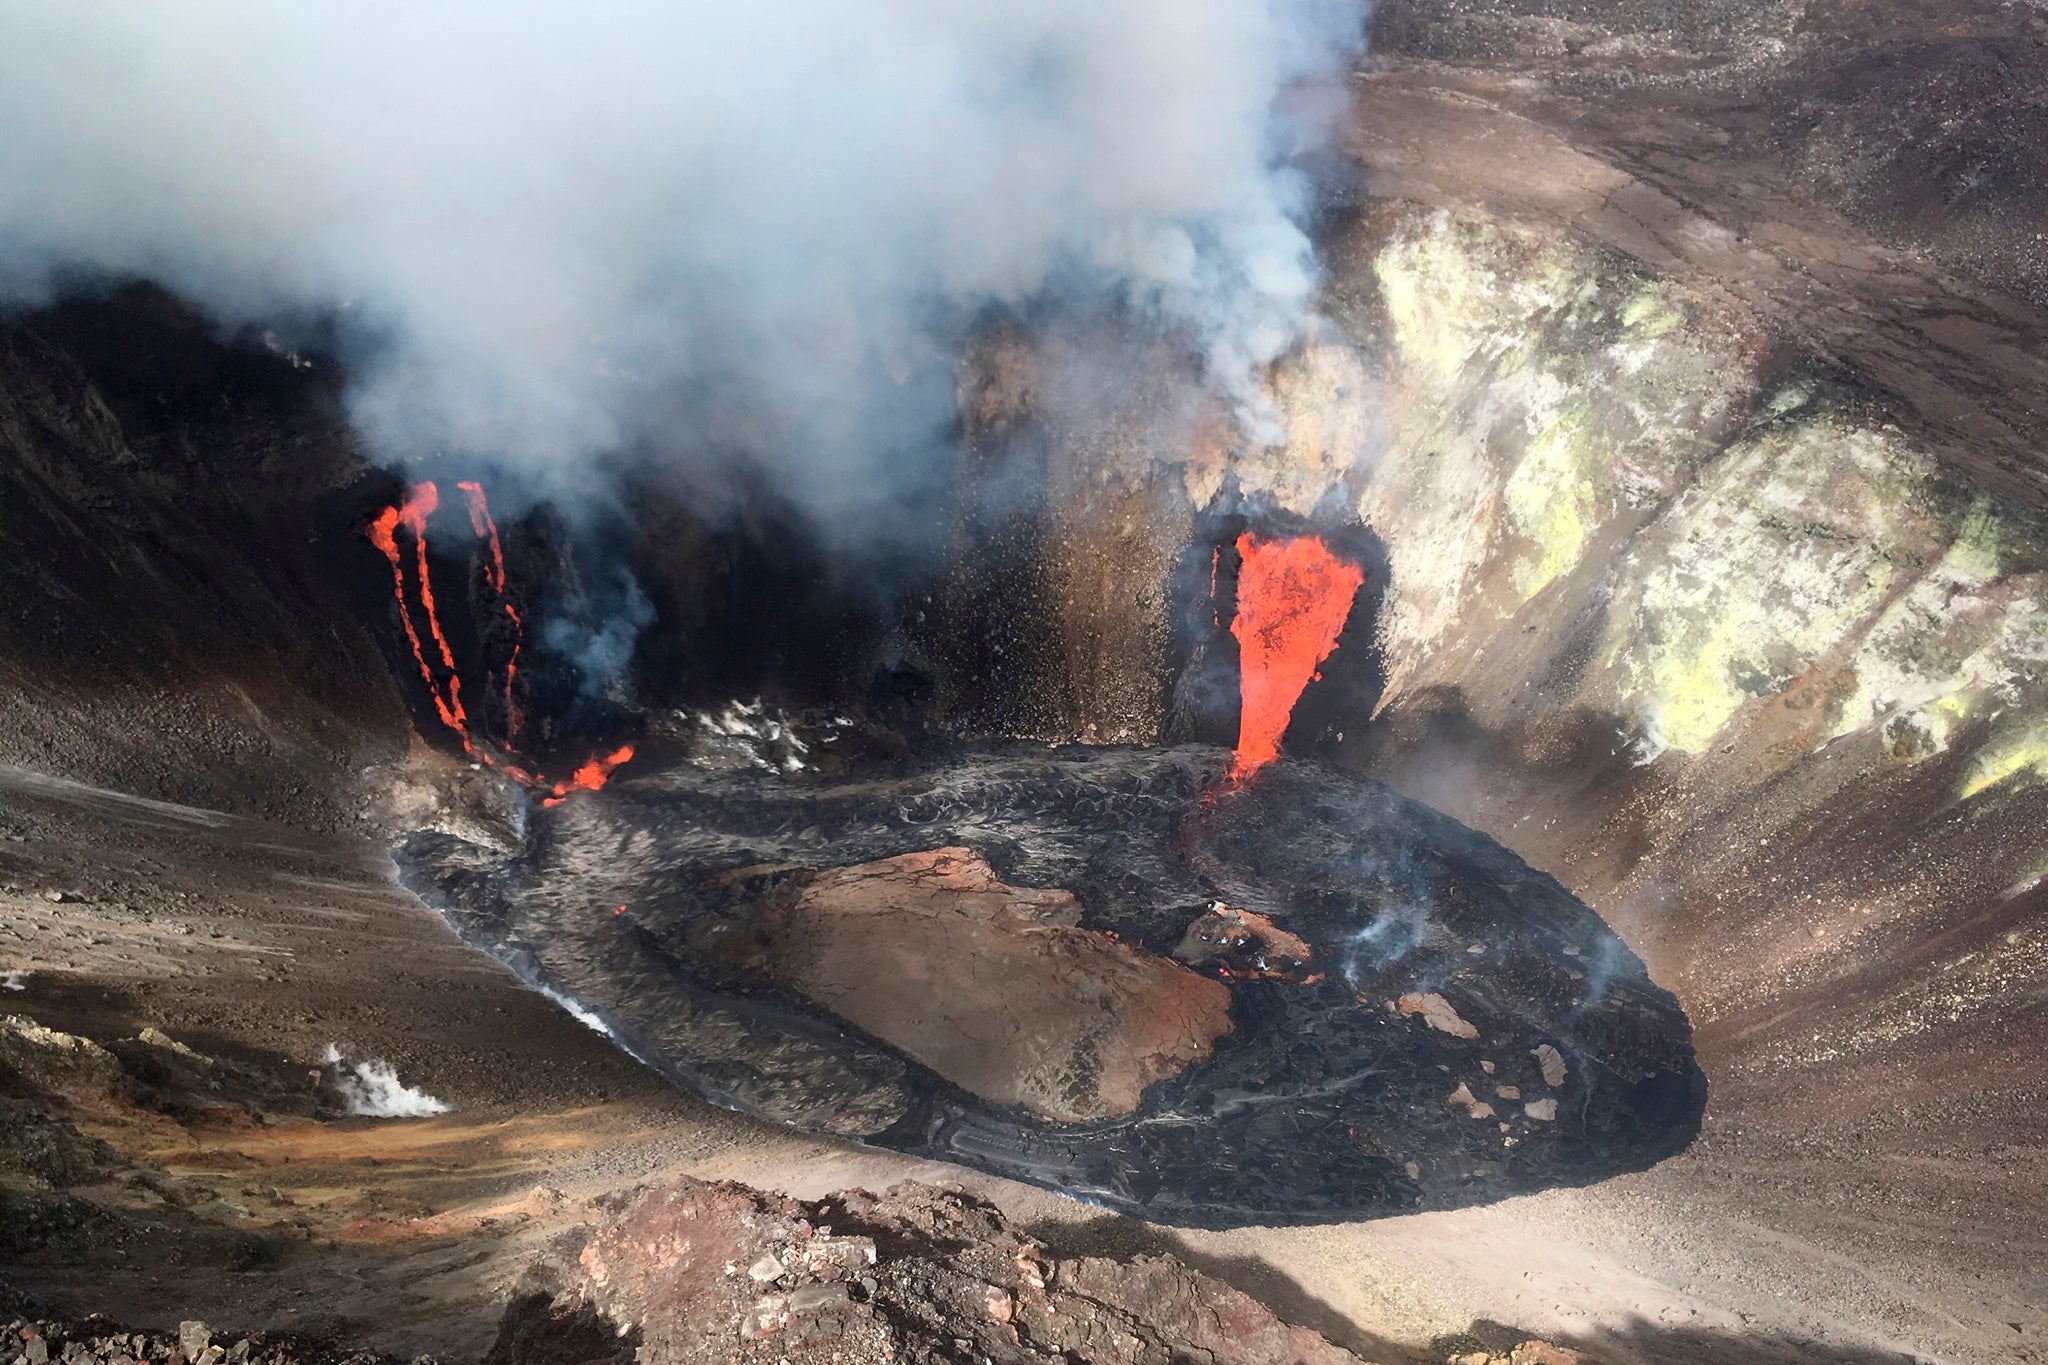 A plume rises near active fissures in the crater of Hawaii's Kīlauea volcano on Monday, Dec. 21, 2020. (Photo: M. Patrick/U.S. Geological Survey, AP)